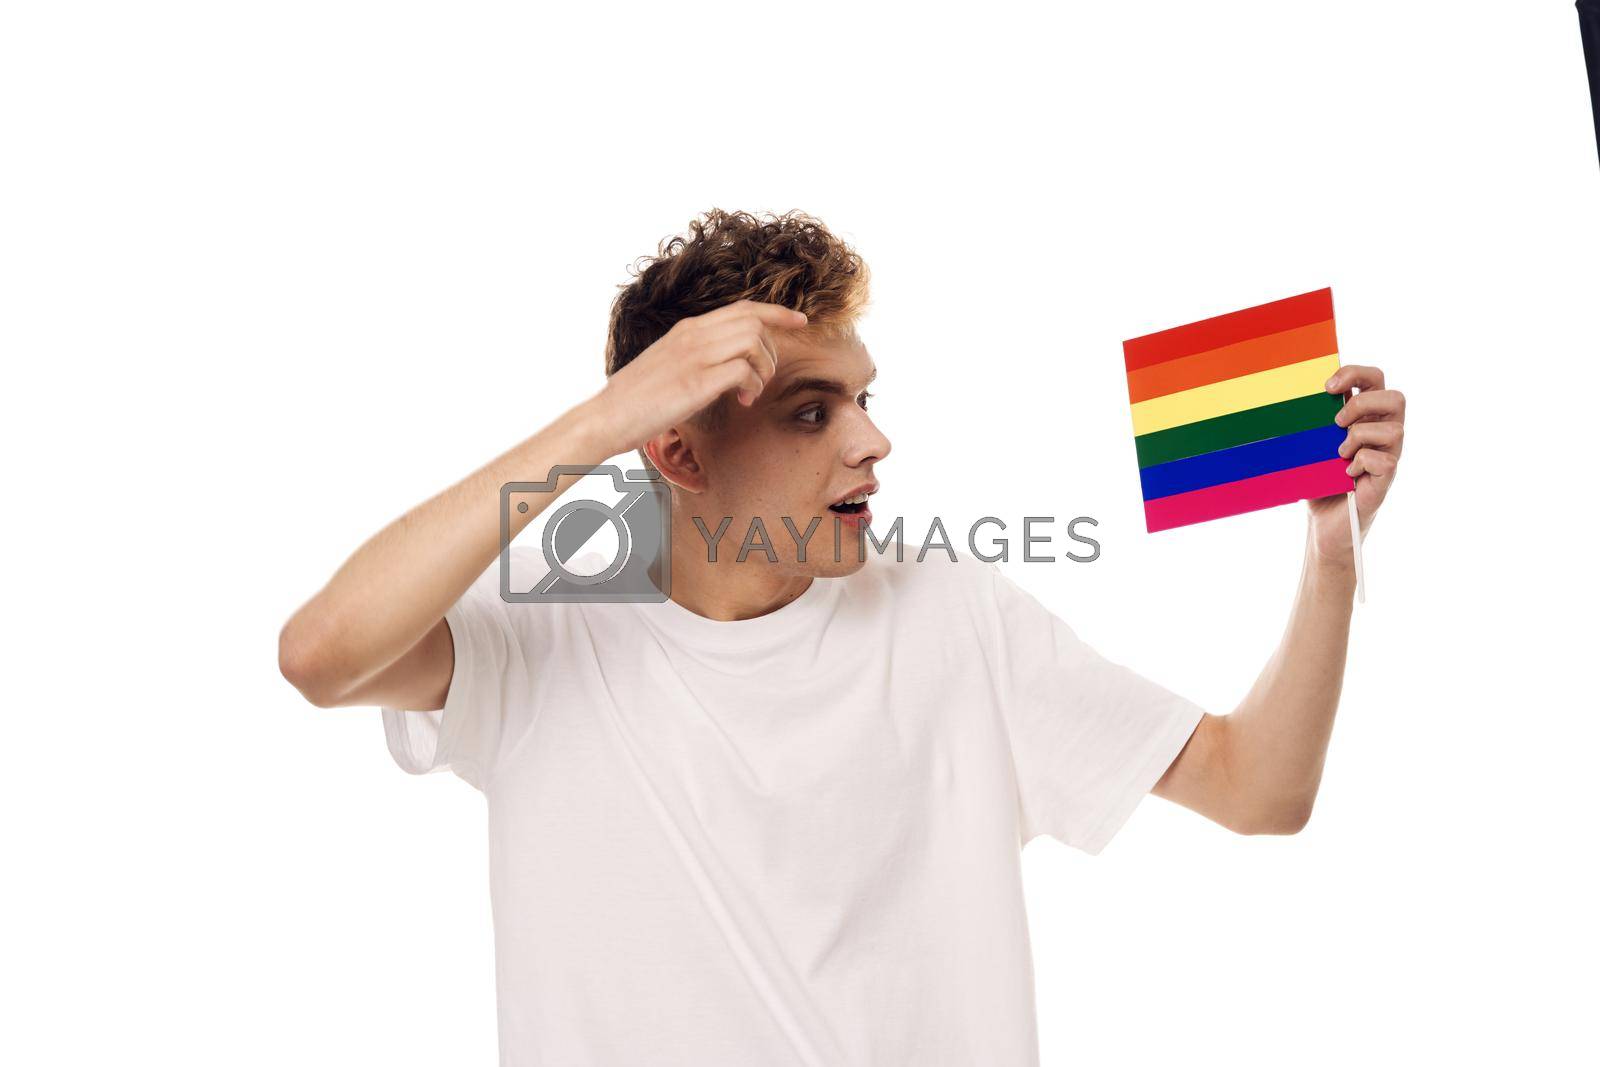 Royalty free image of man with flag community transgender freedom discrimination by Vichizh